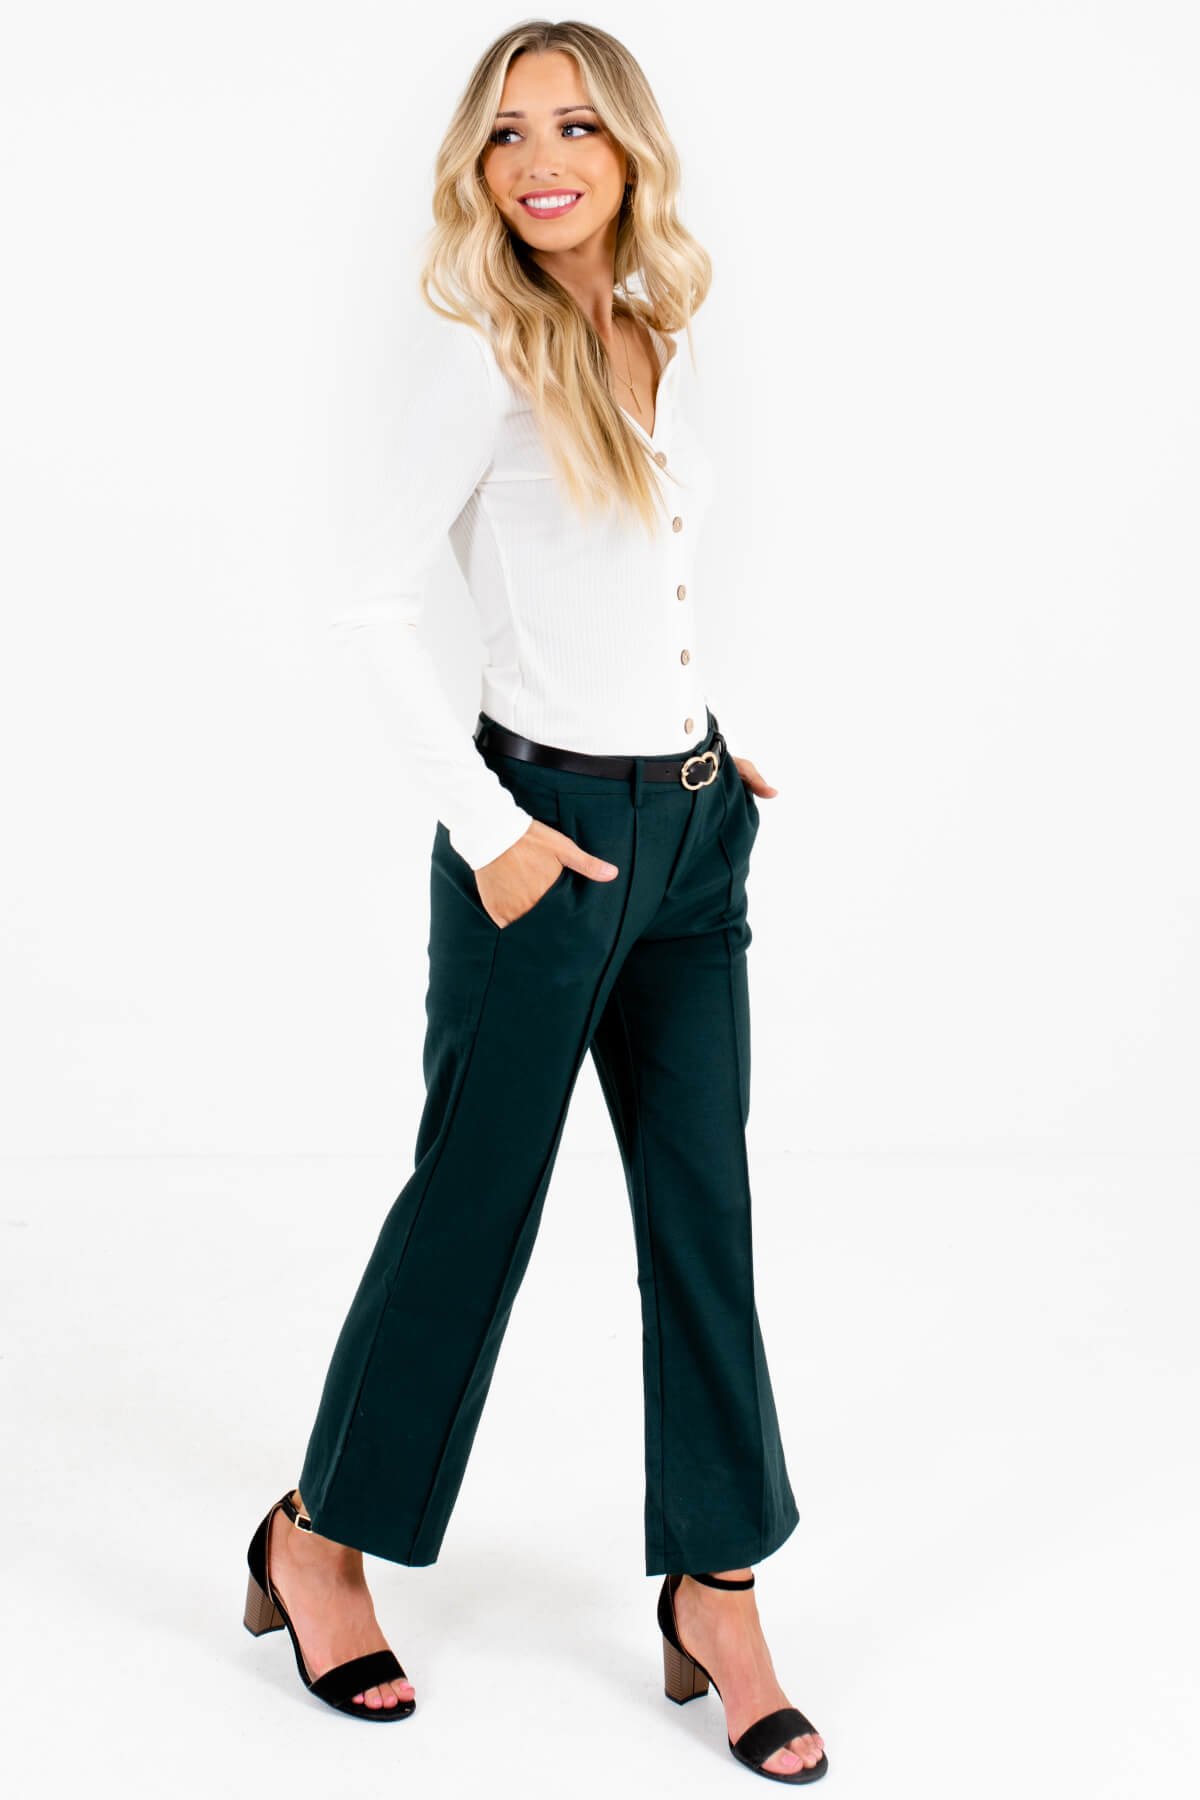 Dark Teal Green Boutique Pants and Slacks for the Office